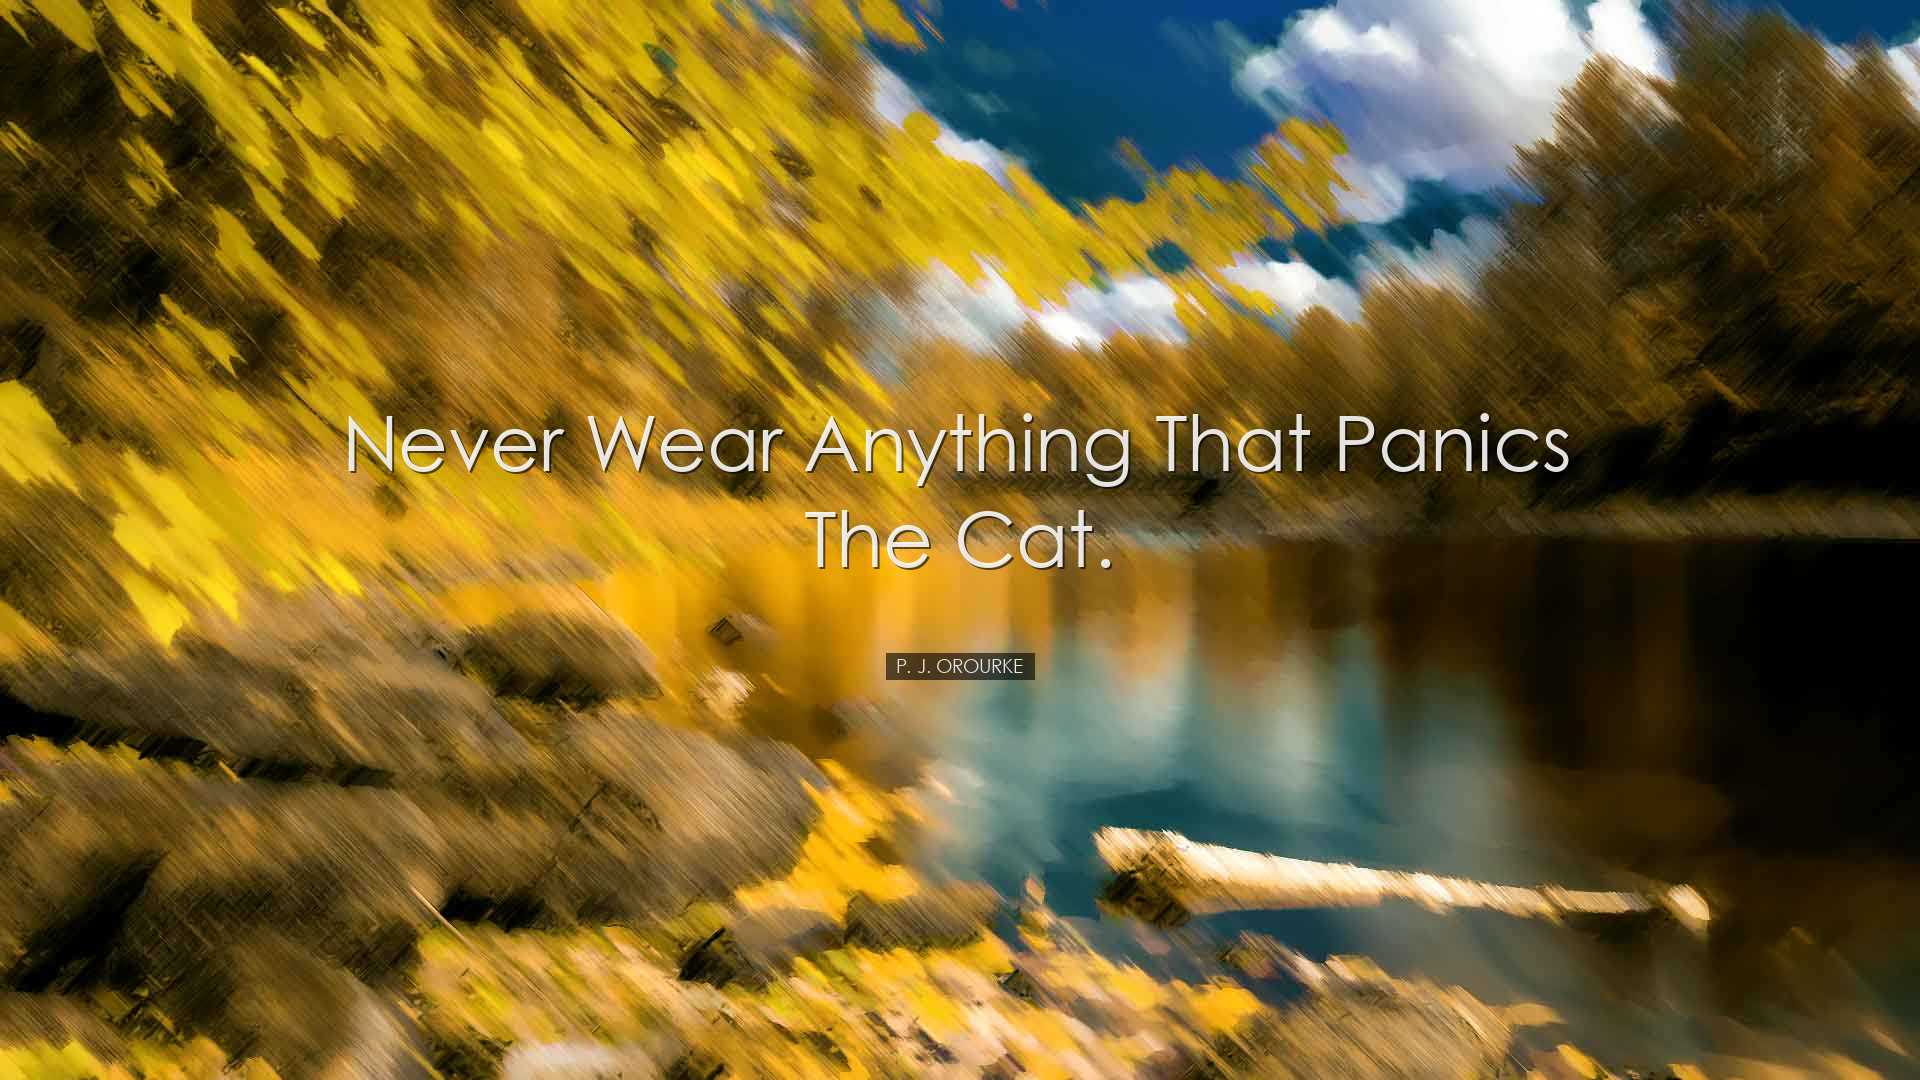 Never wear anything that panics the cat. - P. J. ORourke